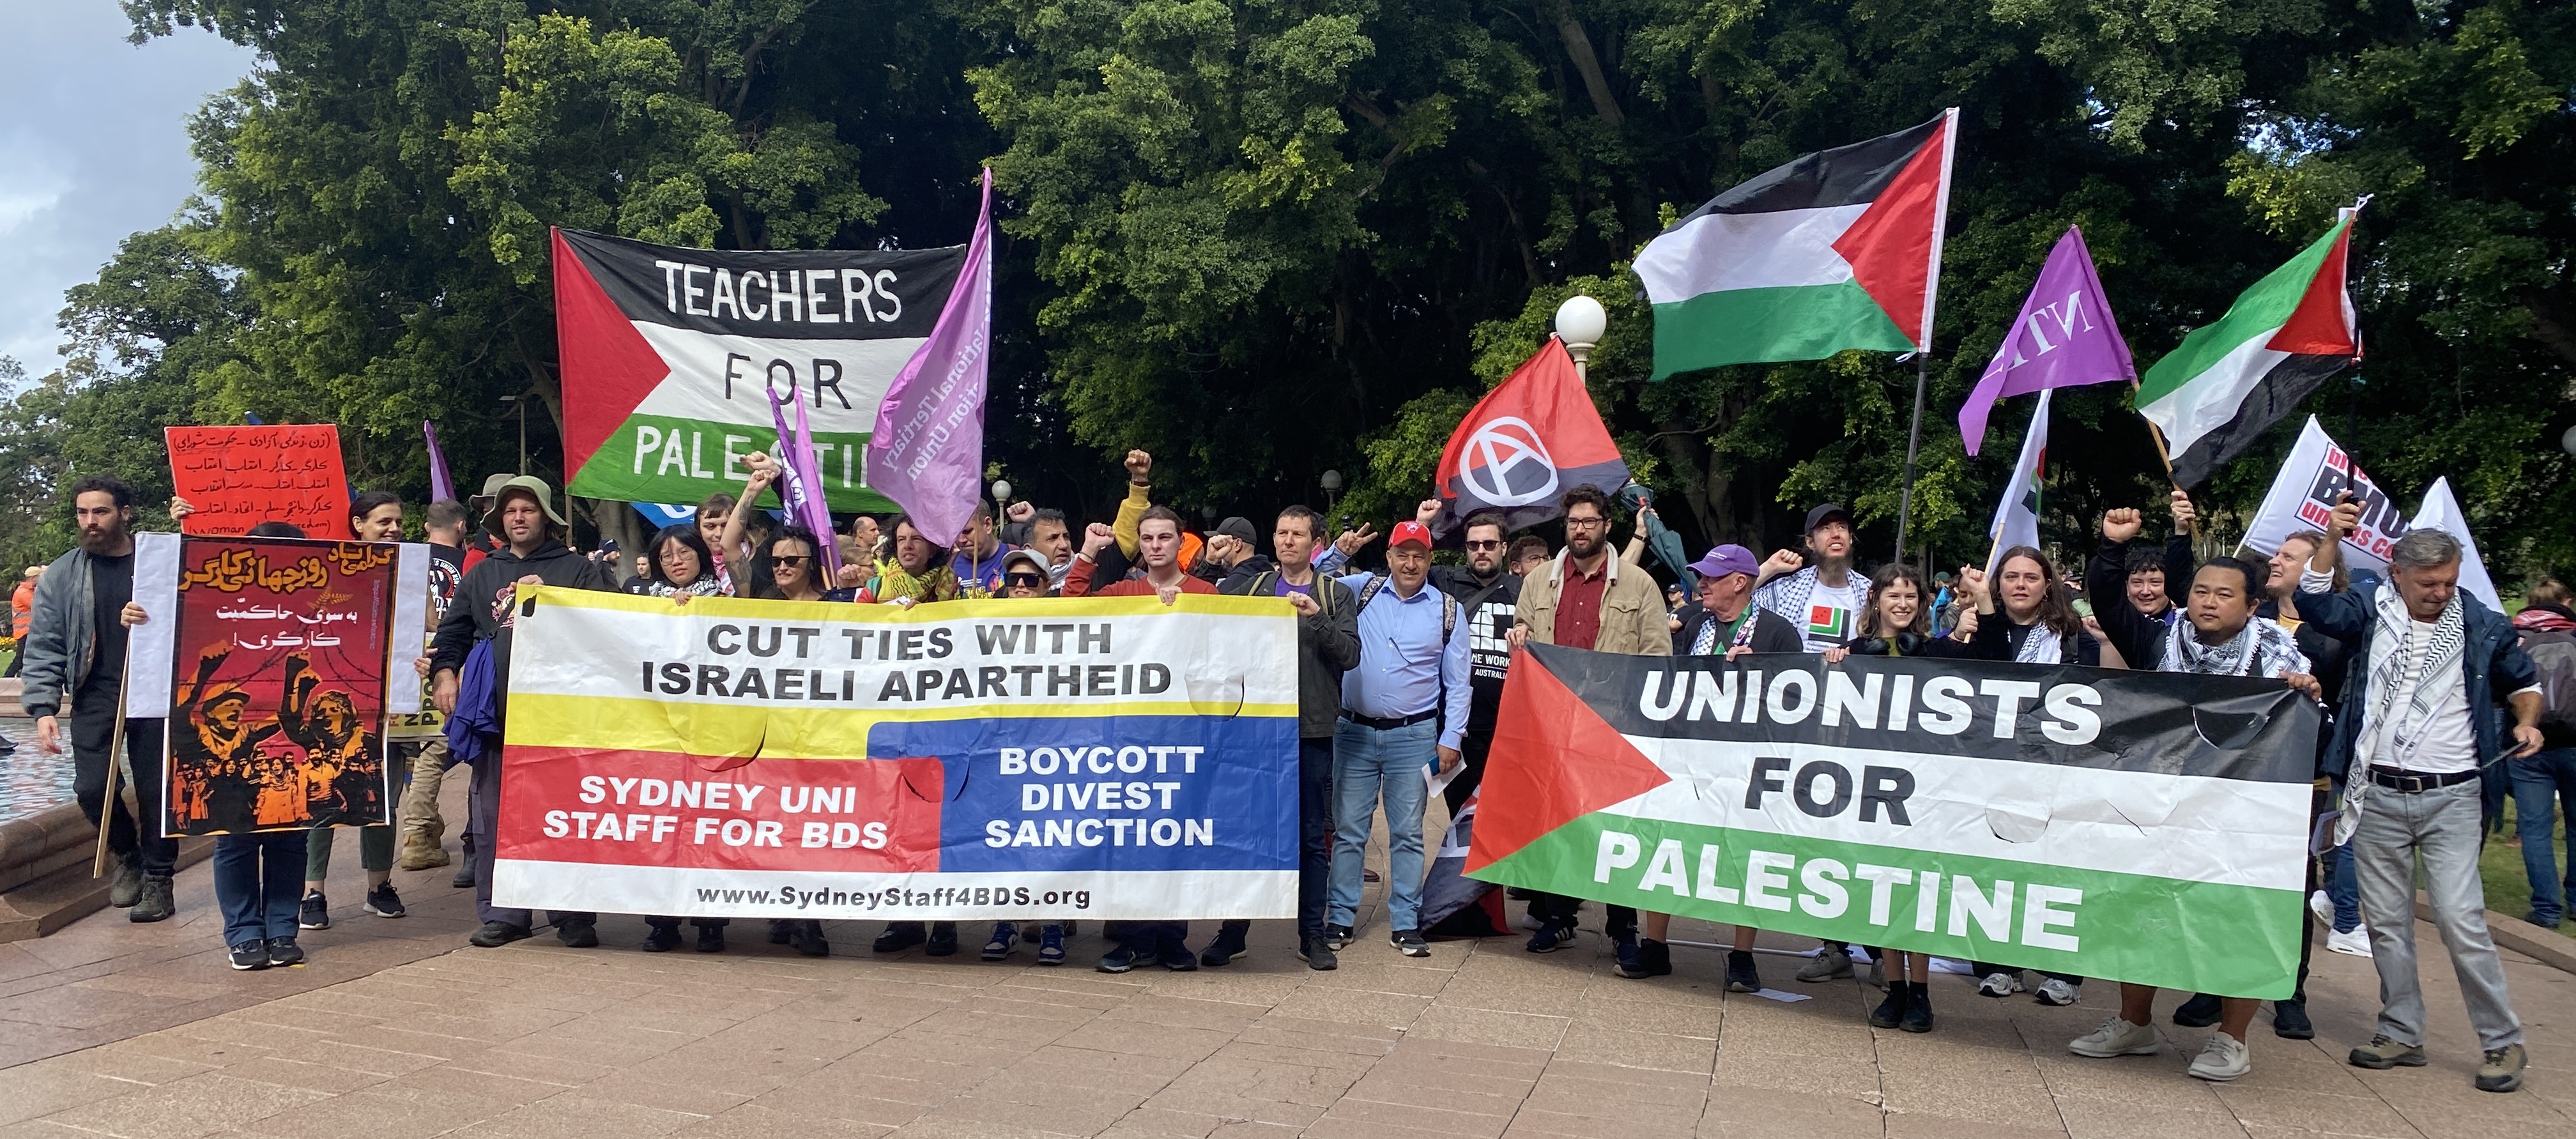 Trade Unionists for Palestine contingent at the Sydney May Day rally